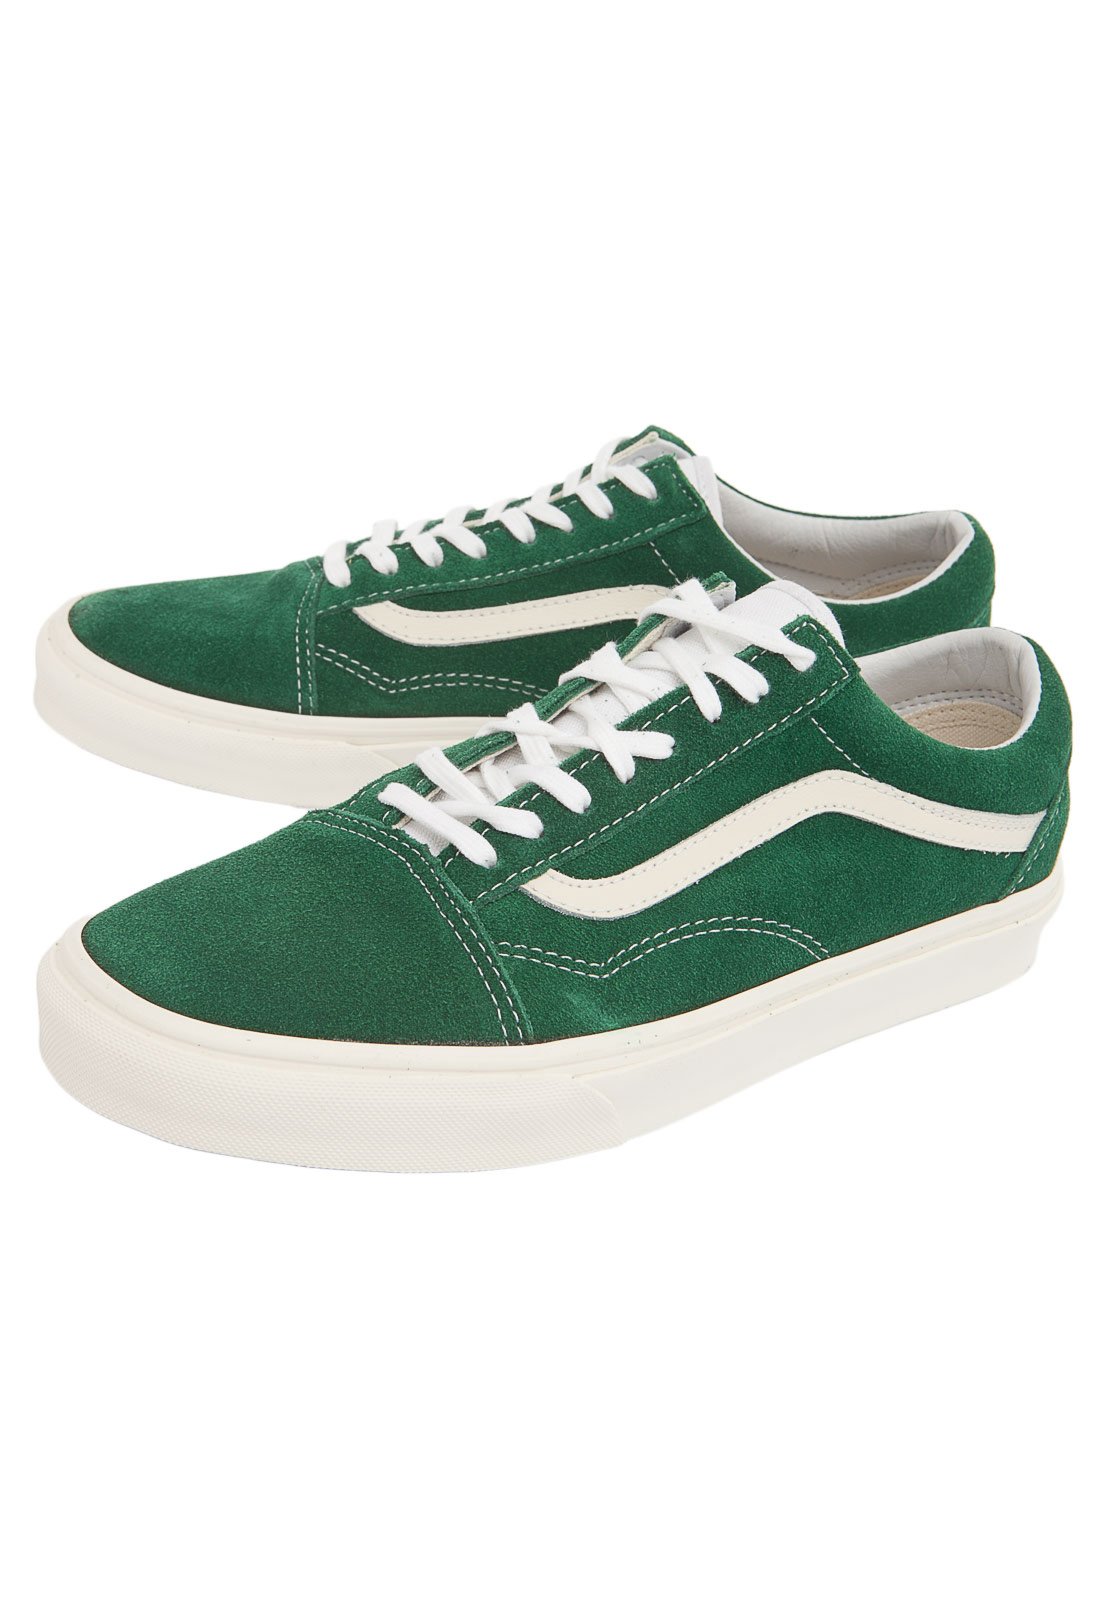 vans verde agua old skool,www.spinephysiotherapy.com